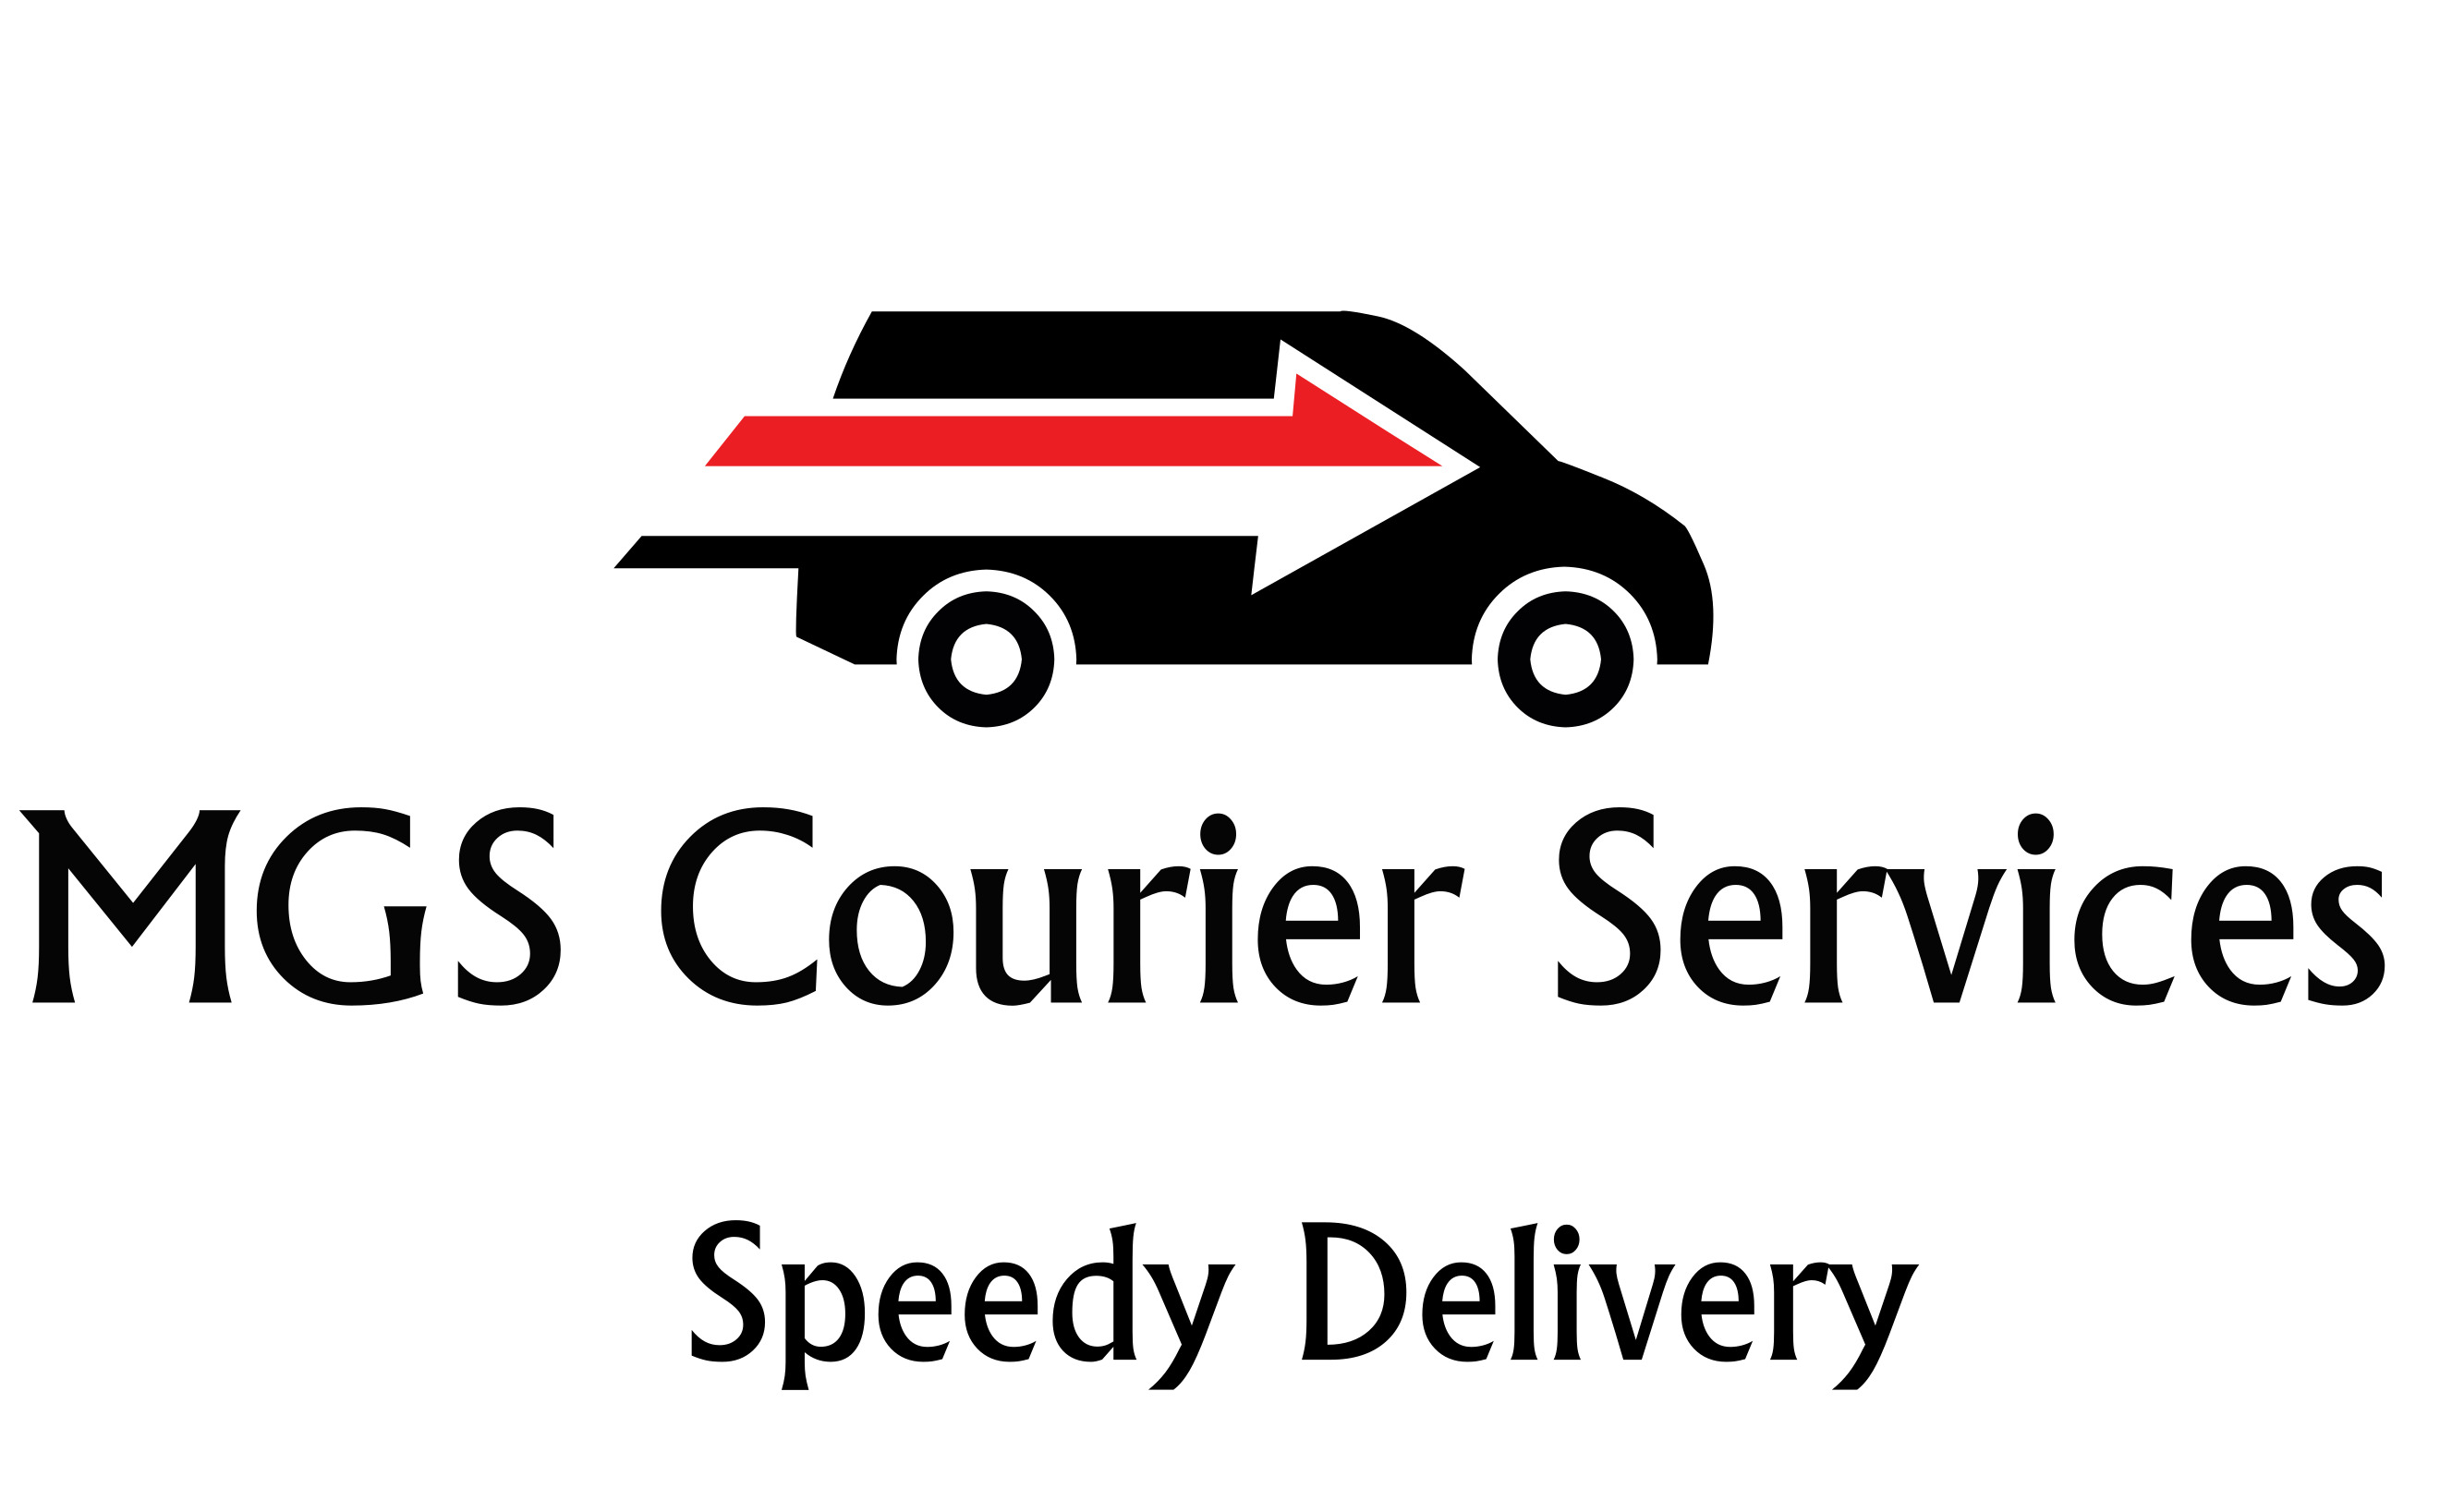 MGS Courier Services